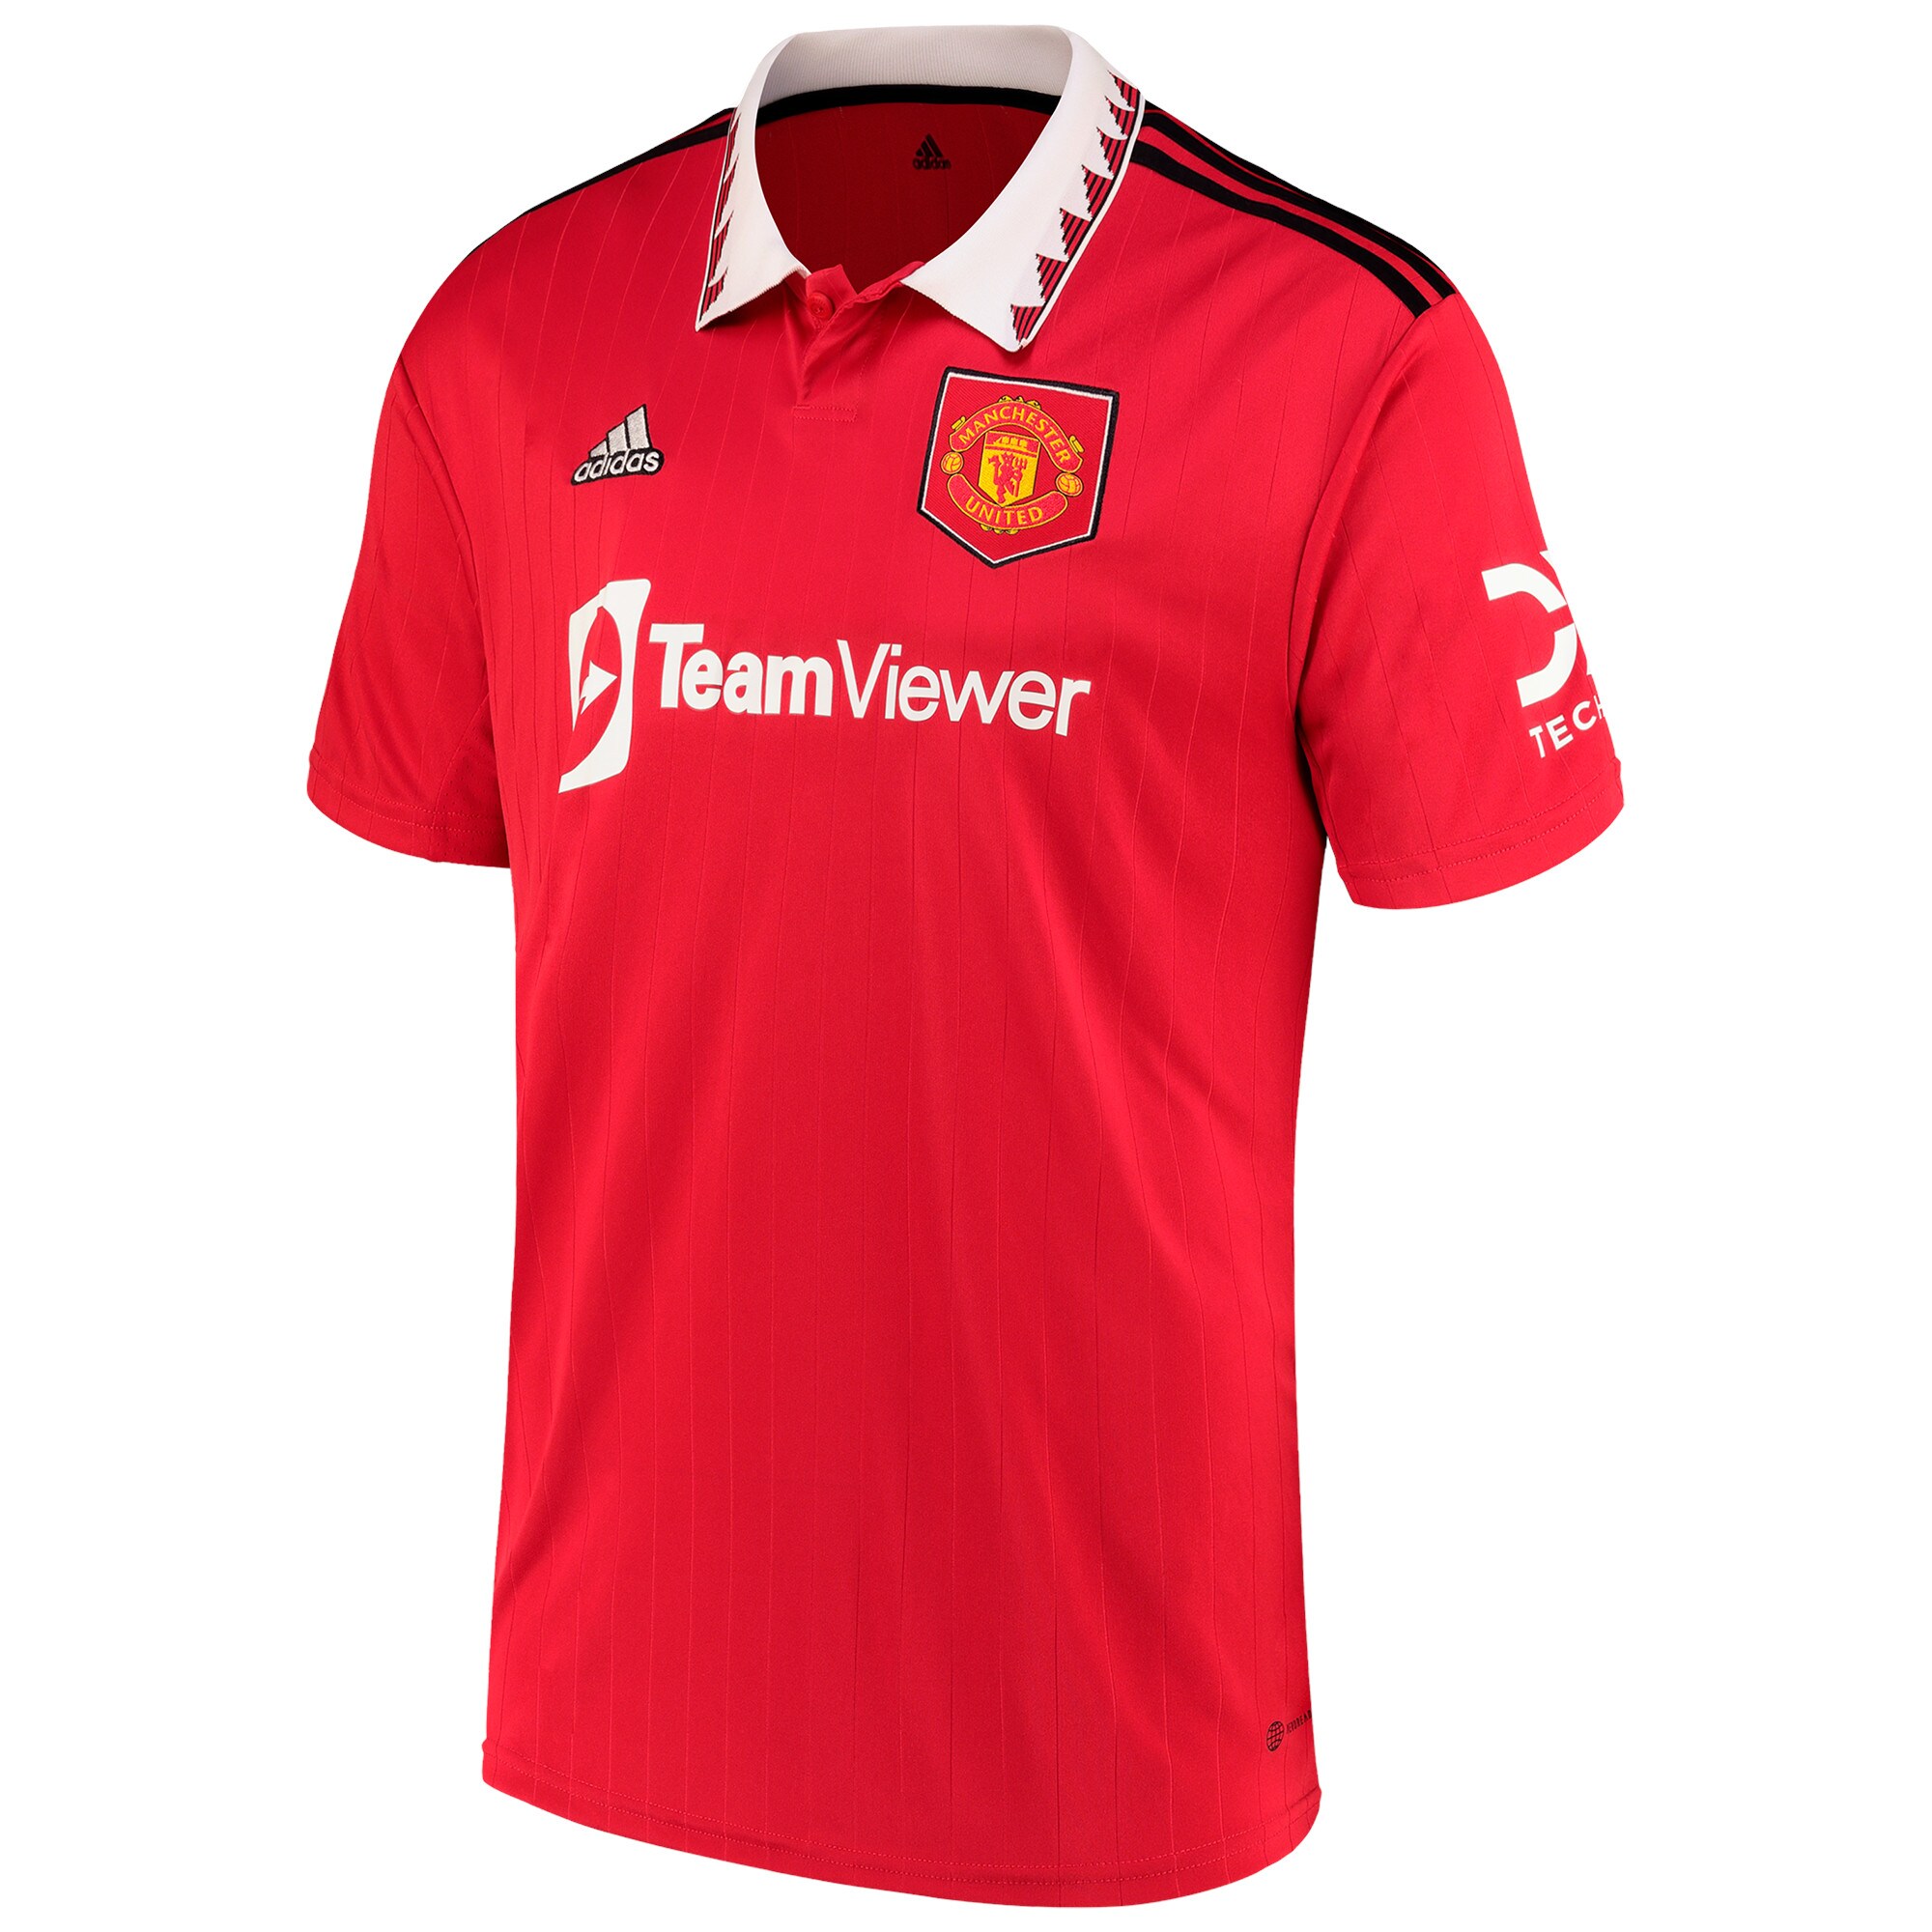 Manchester United Cup Home Shirt 2022-23 with Galton 11 printing